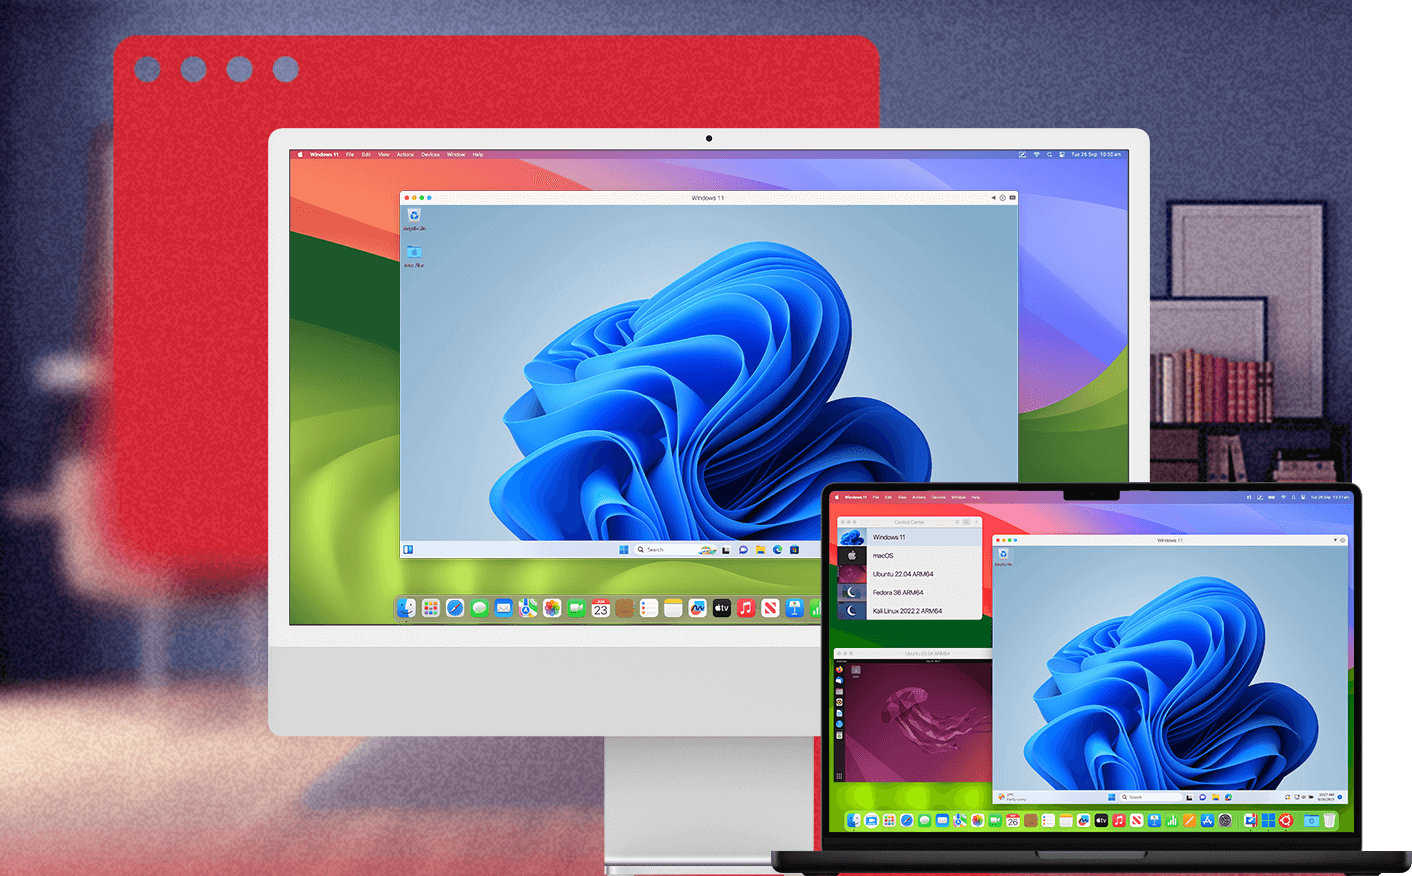 Compare Parallels Desktop to other virtualization solutions